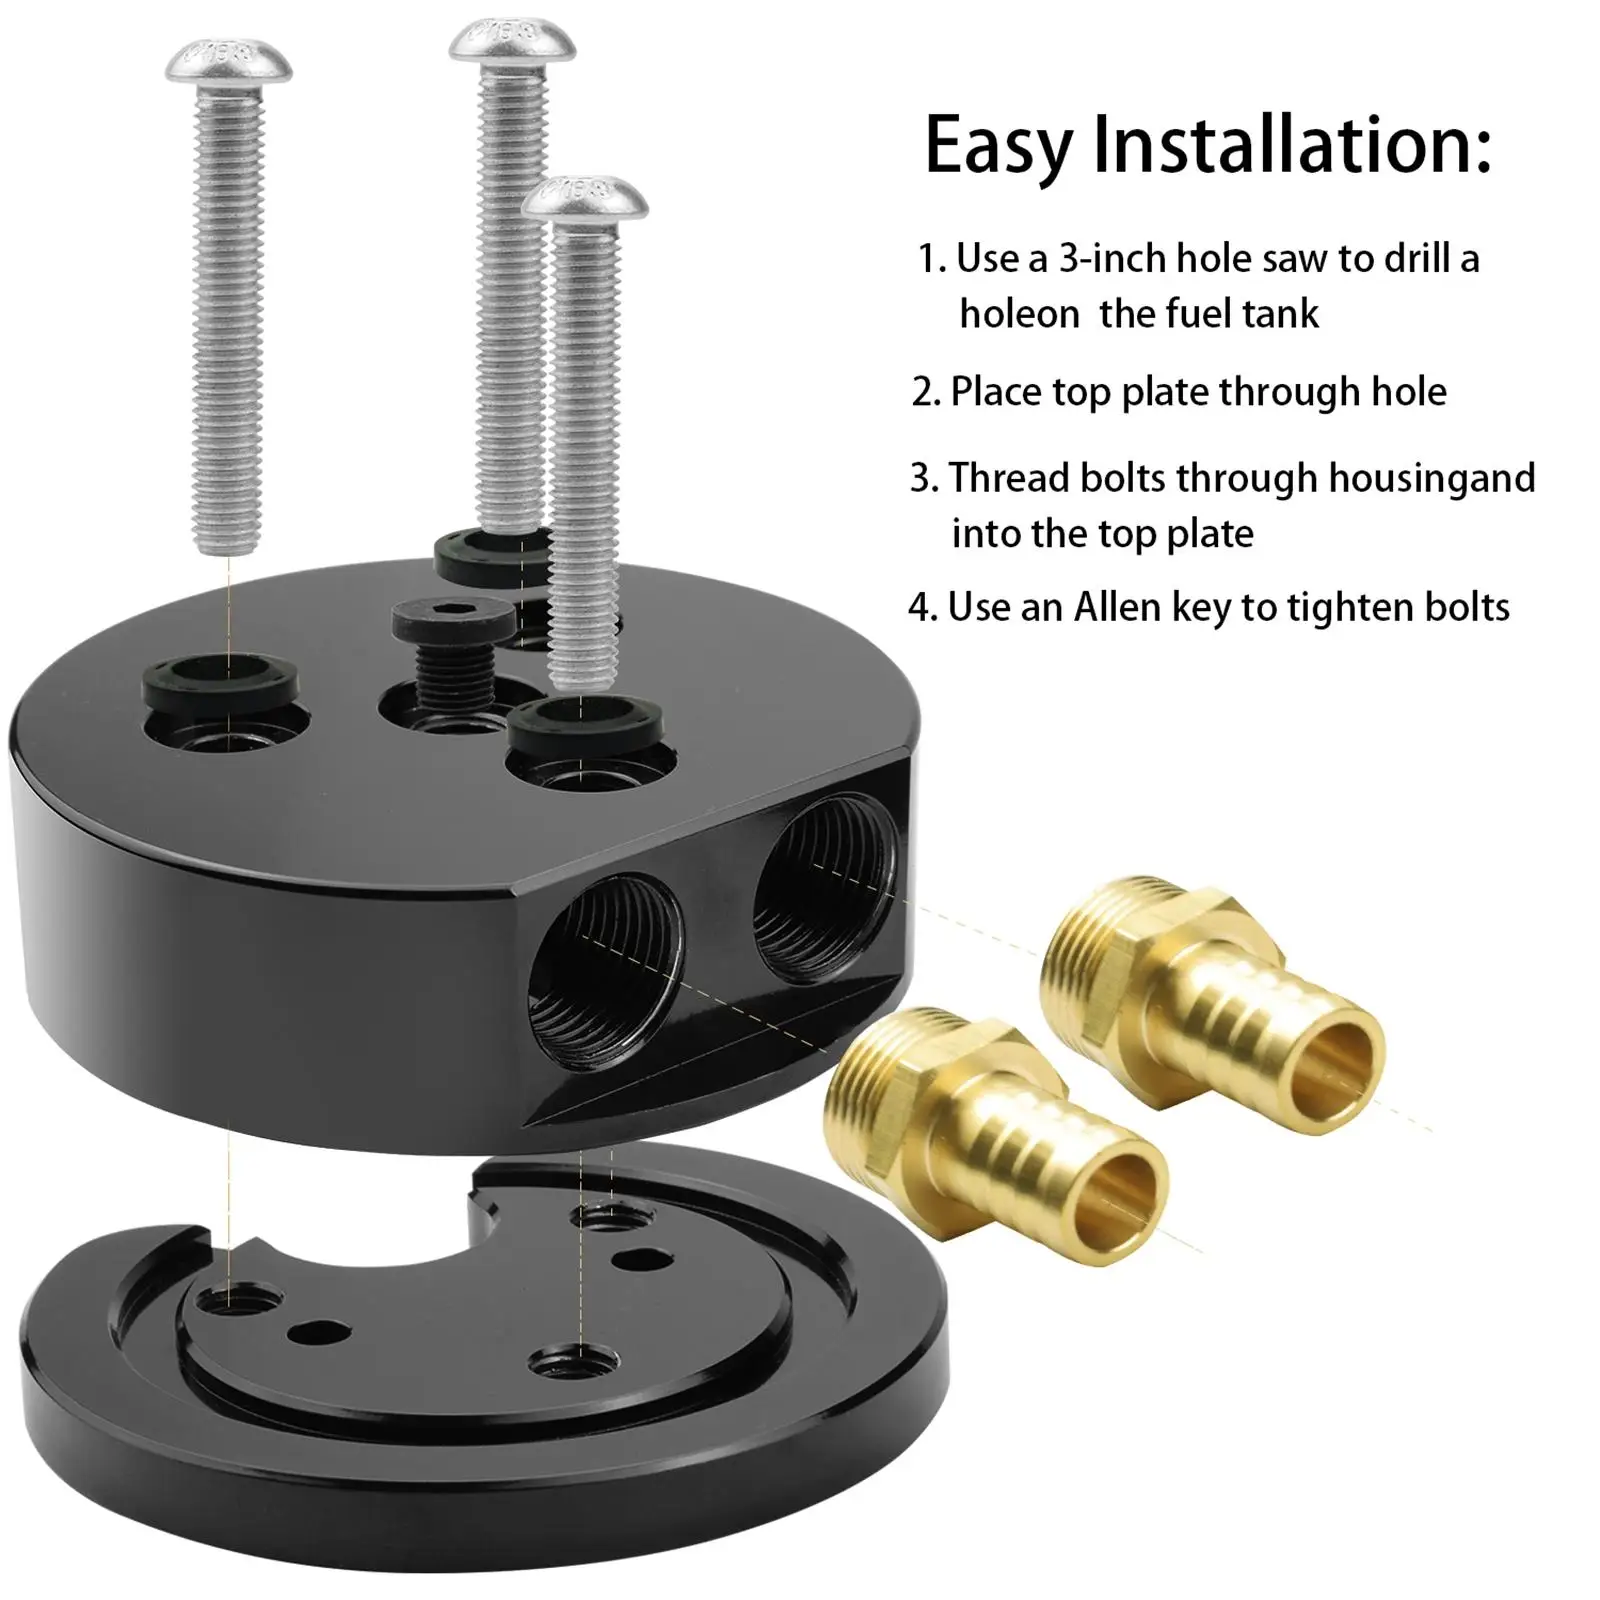 Fuel Tank Sump Kit Accessory for Gasoline Fuel Tanks Easy Installation